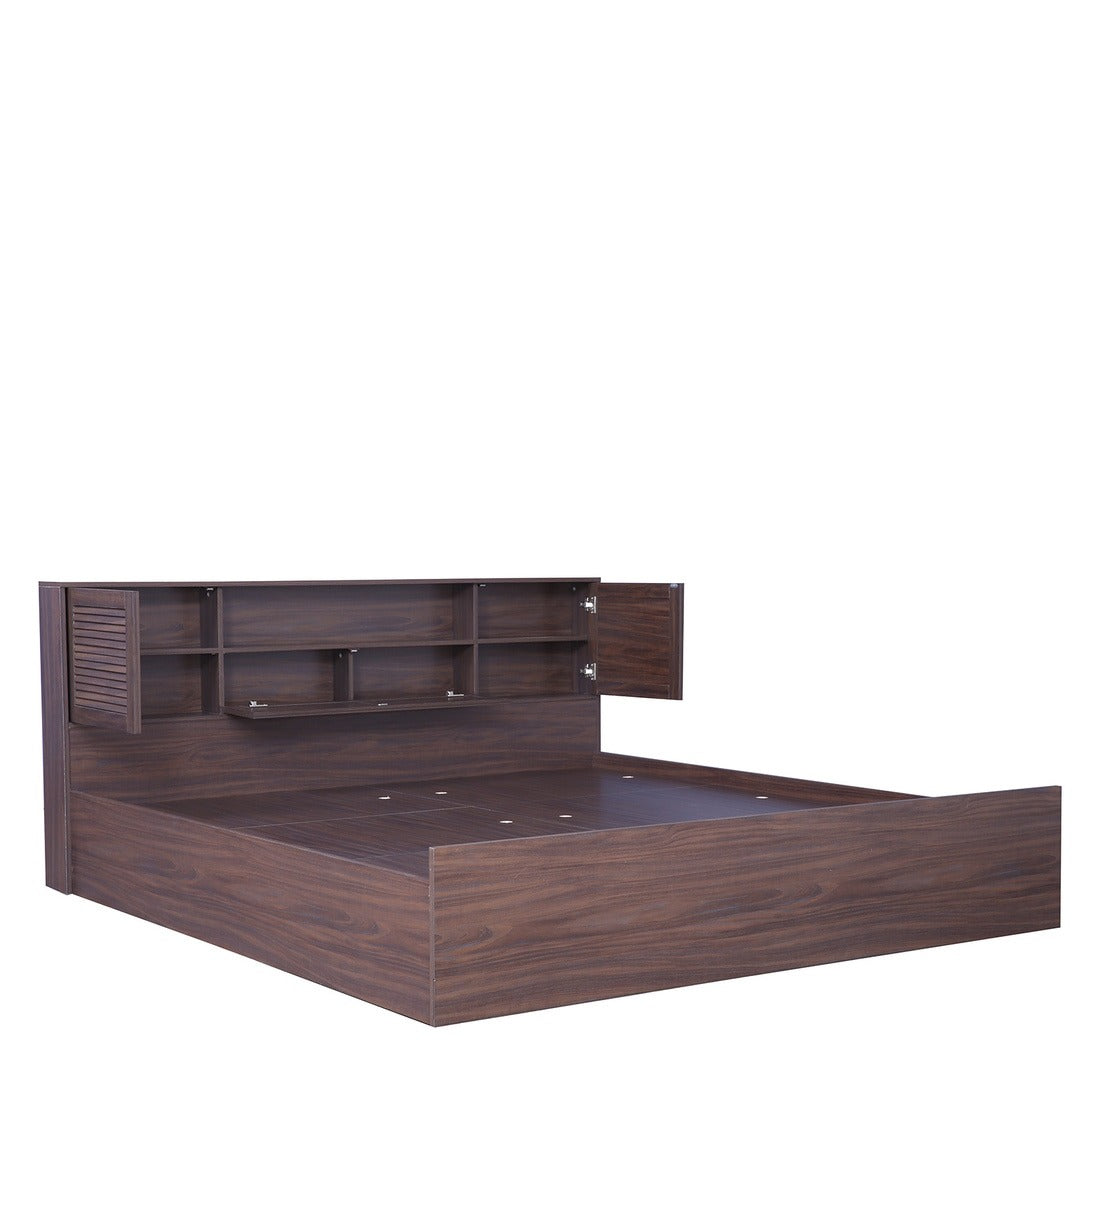 Detec™ Queen Size Bed with Storage in Walnut Finish